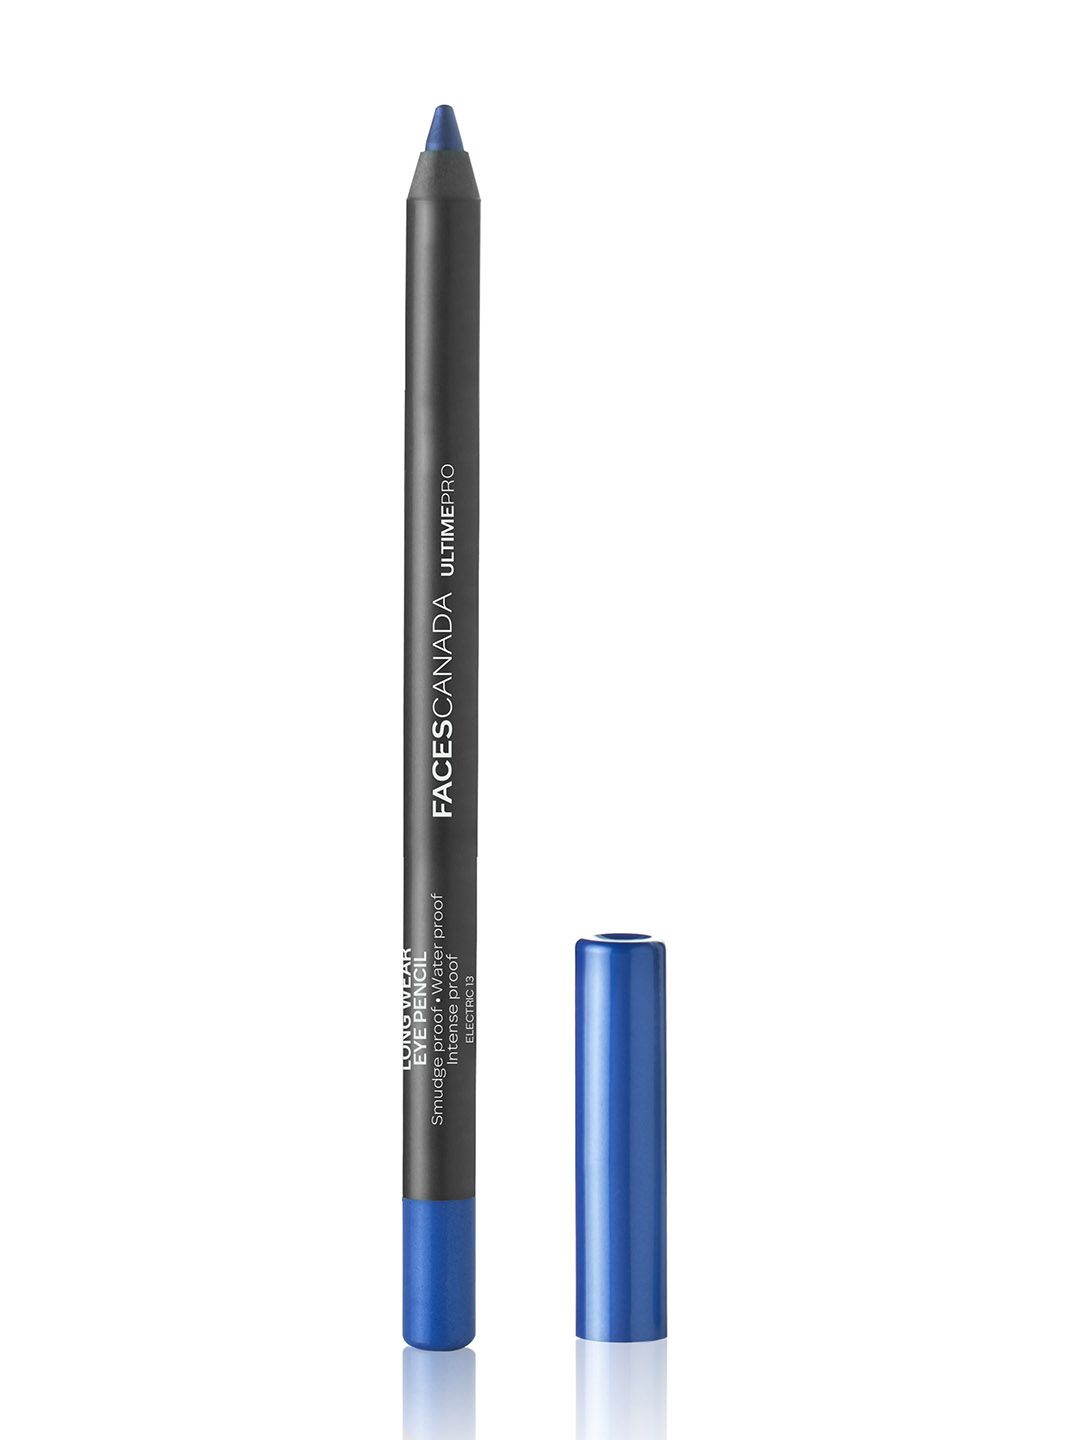 FACES CANADA Longwear Eyepencil - Electric 13 Price in India